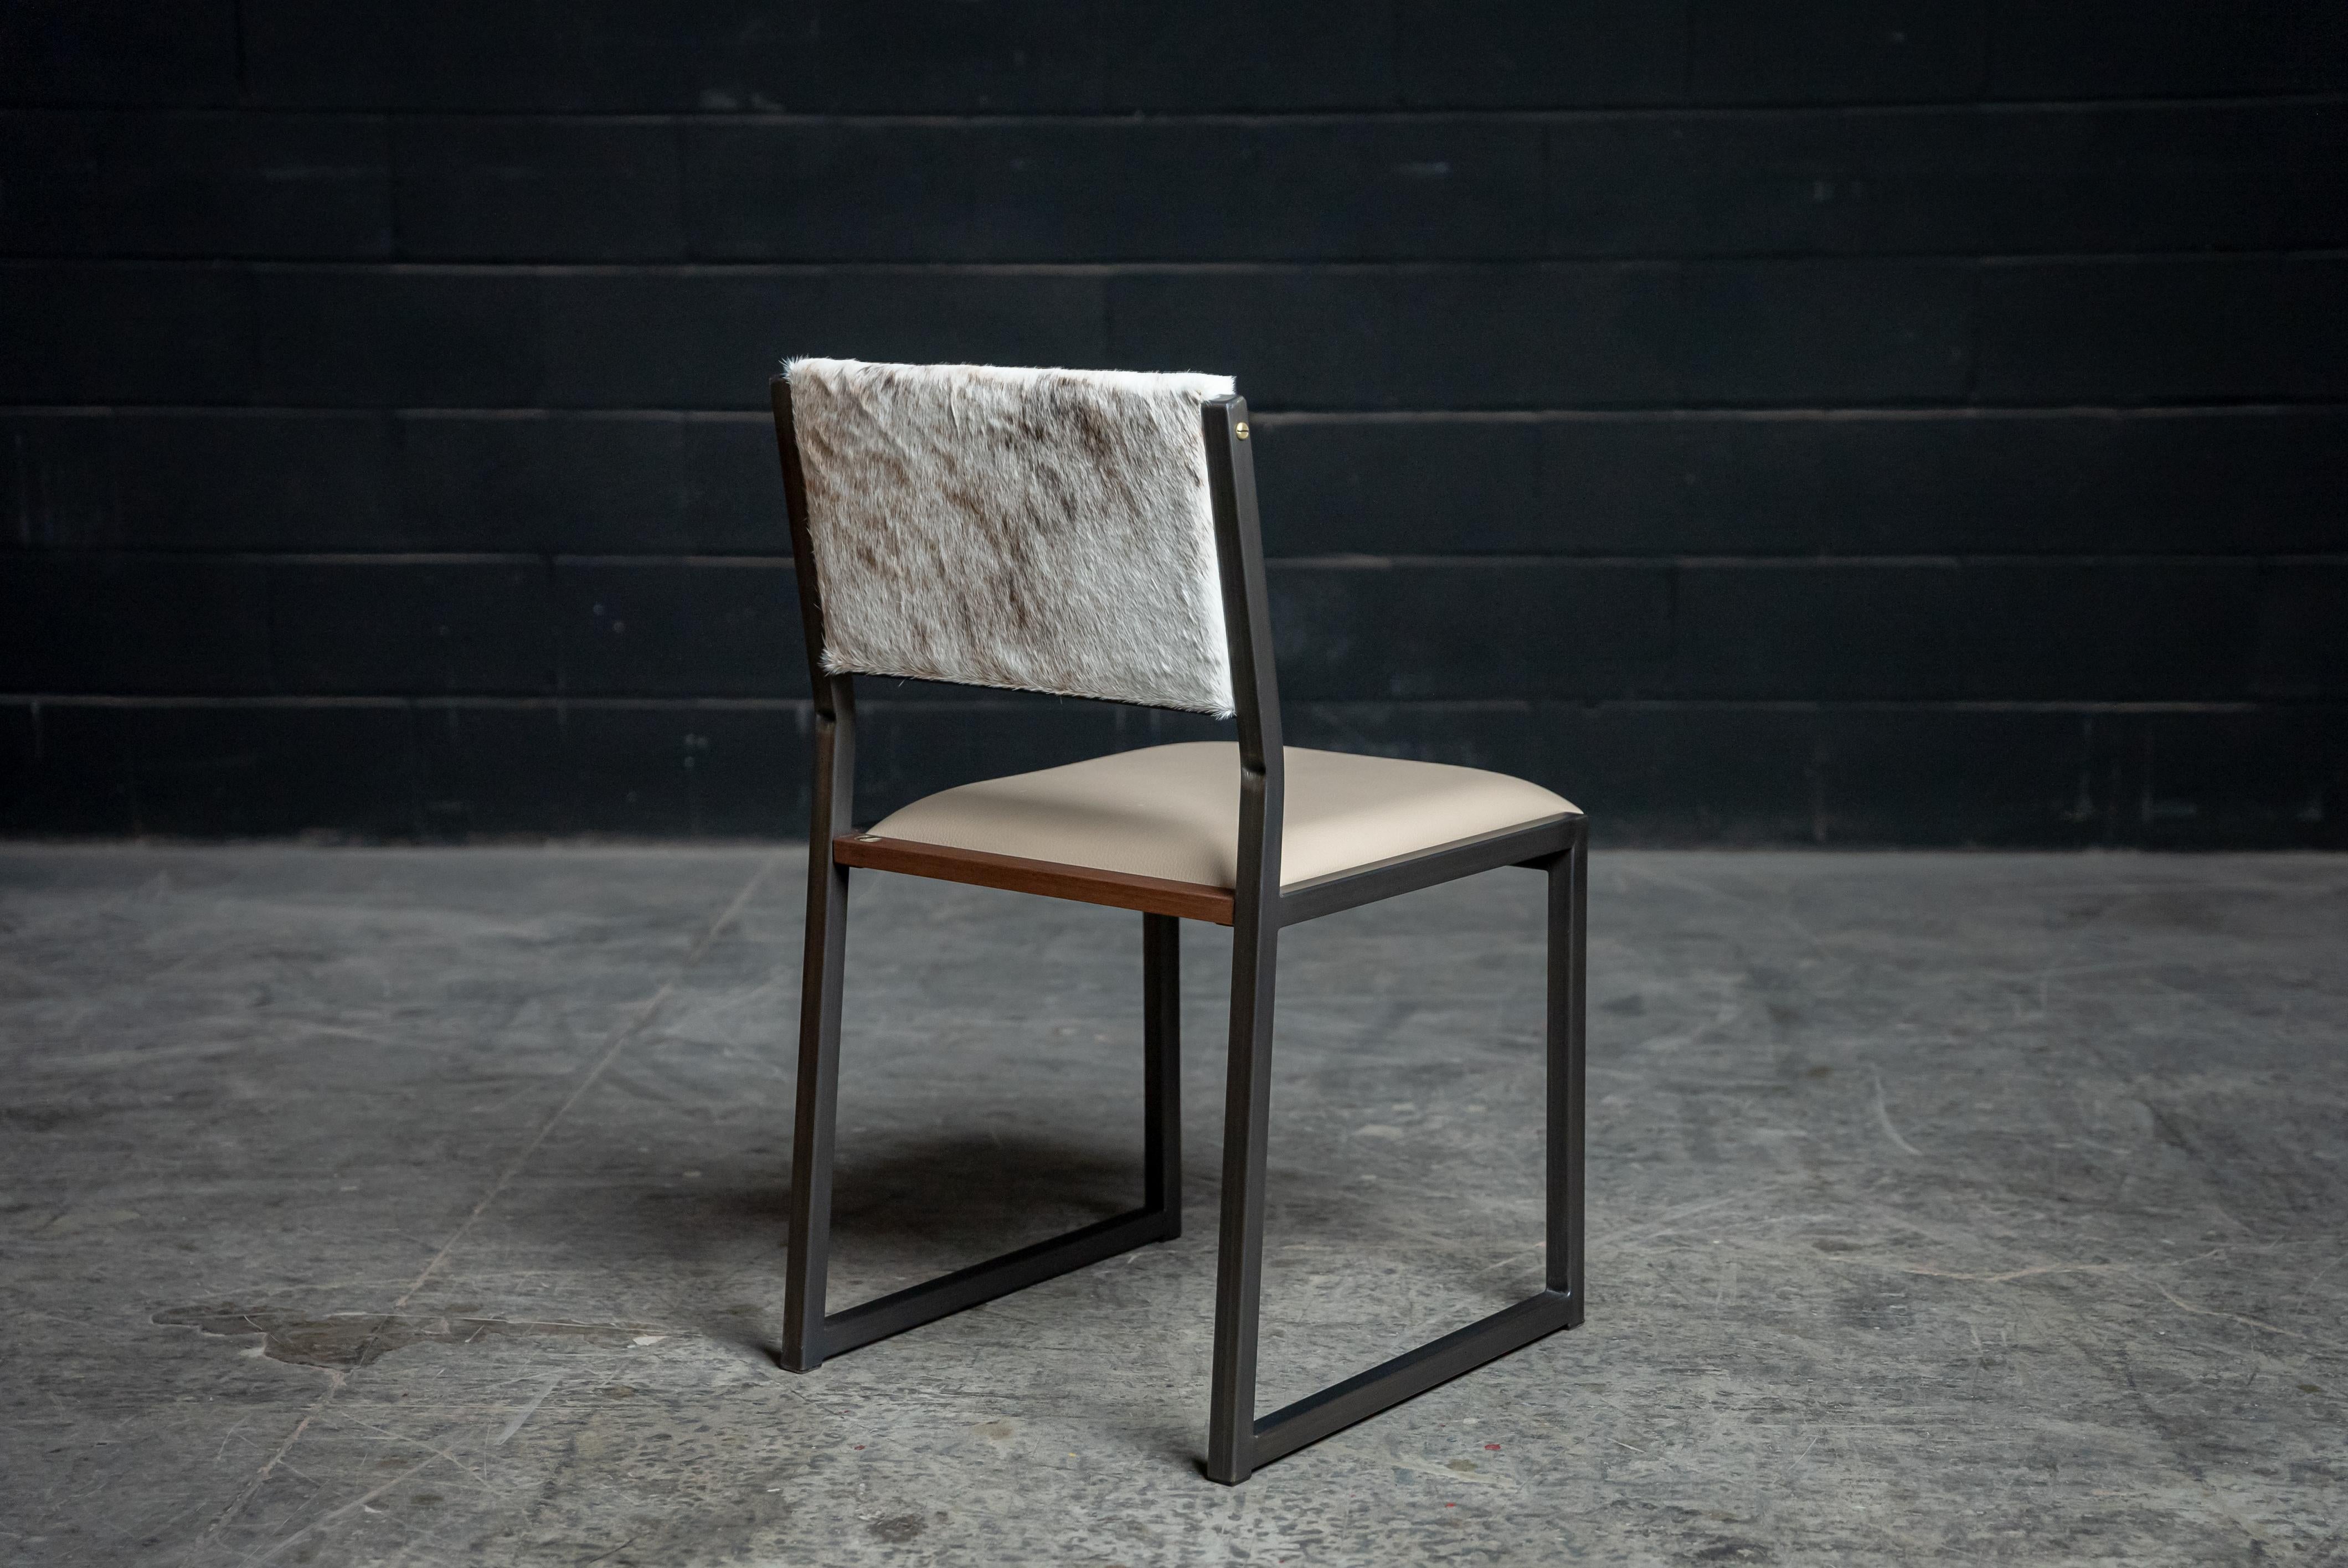 Canadian Shaker Modern Chair, Brushed Bronze, Walnut, Sand Leather, Light Brindle Cowhide For Sale